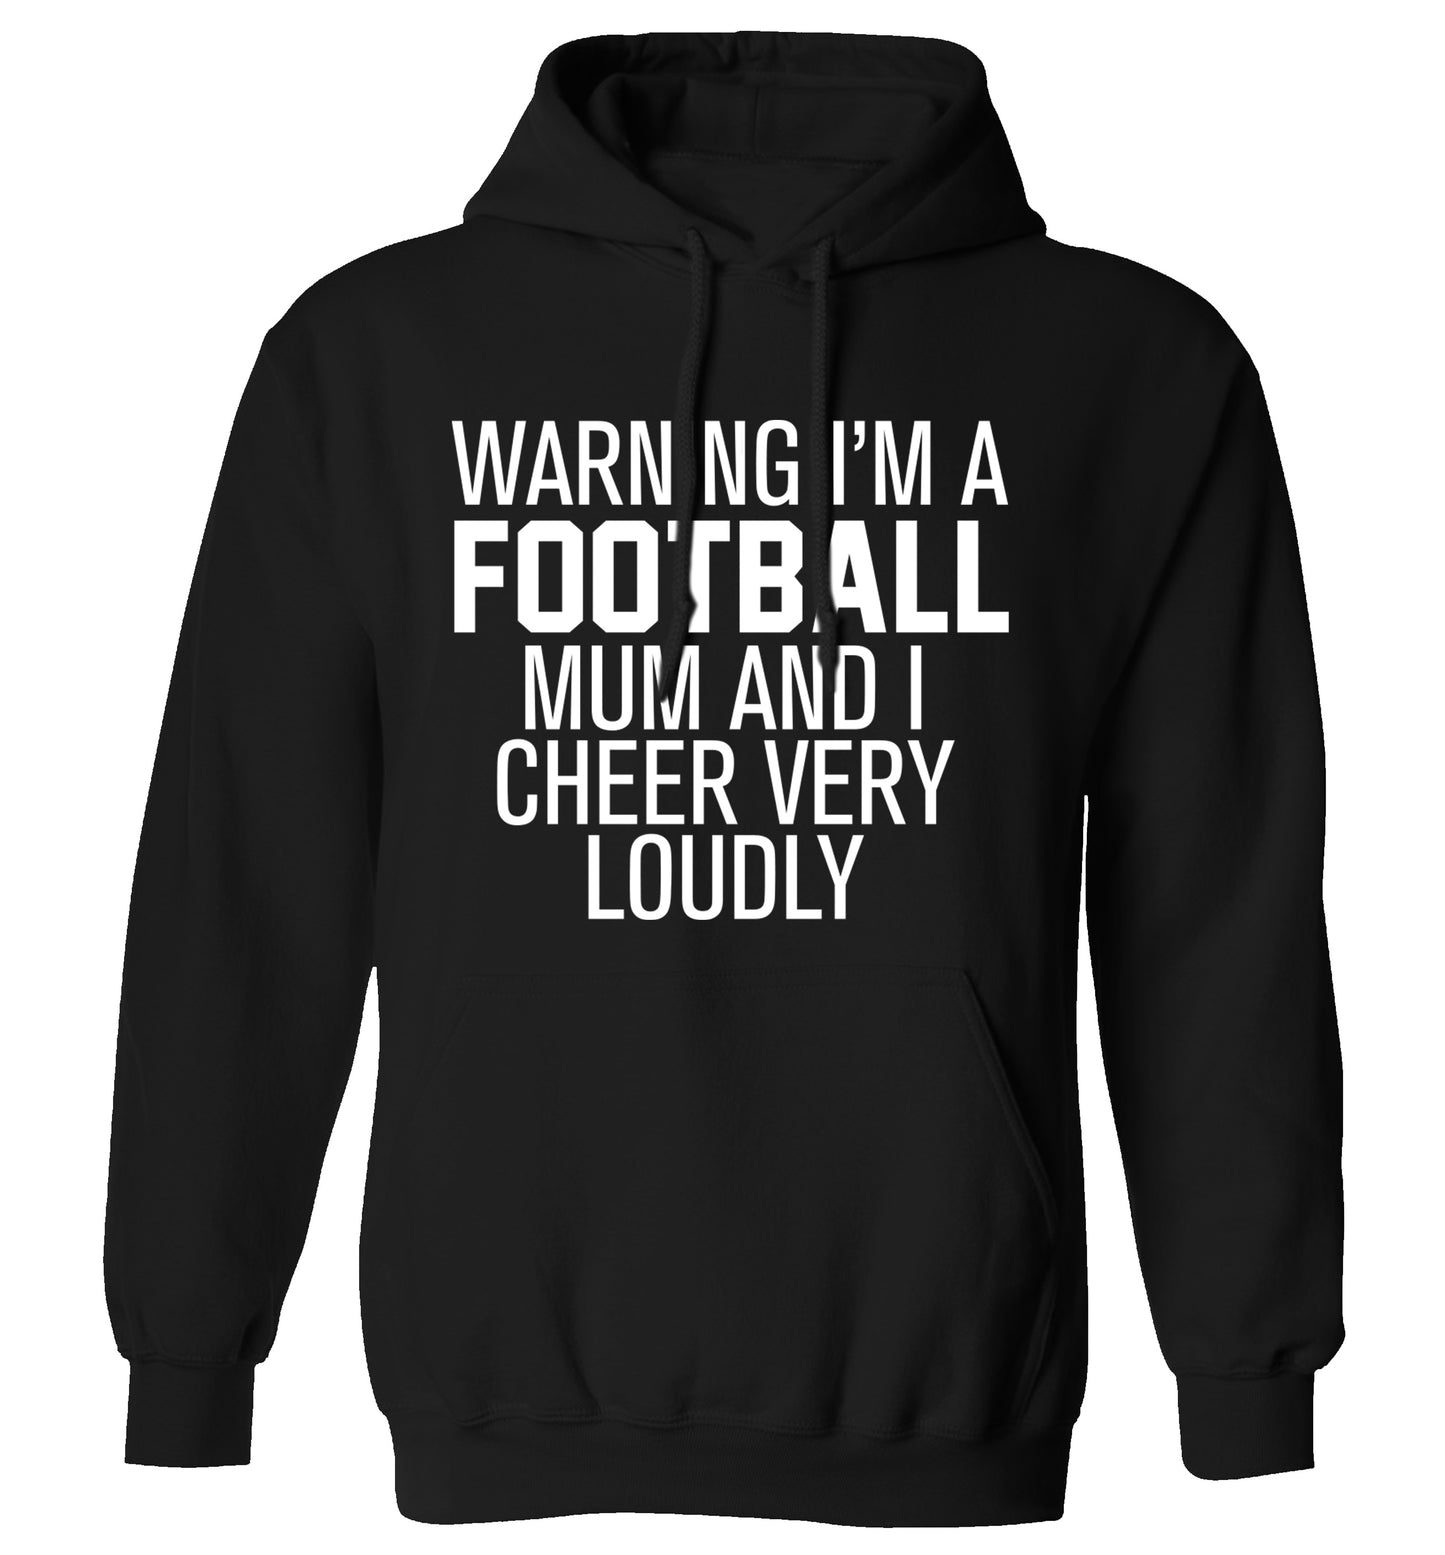 Warning I'm a football mum and I cheer very loudly adults unisexblack hoodie 2XL